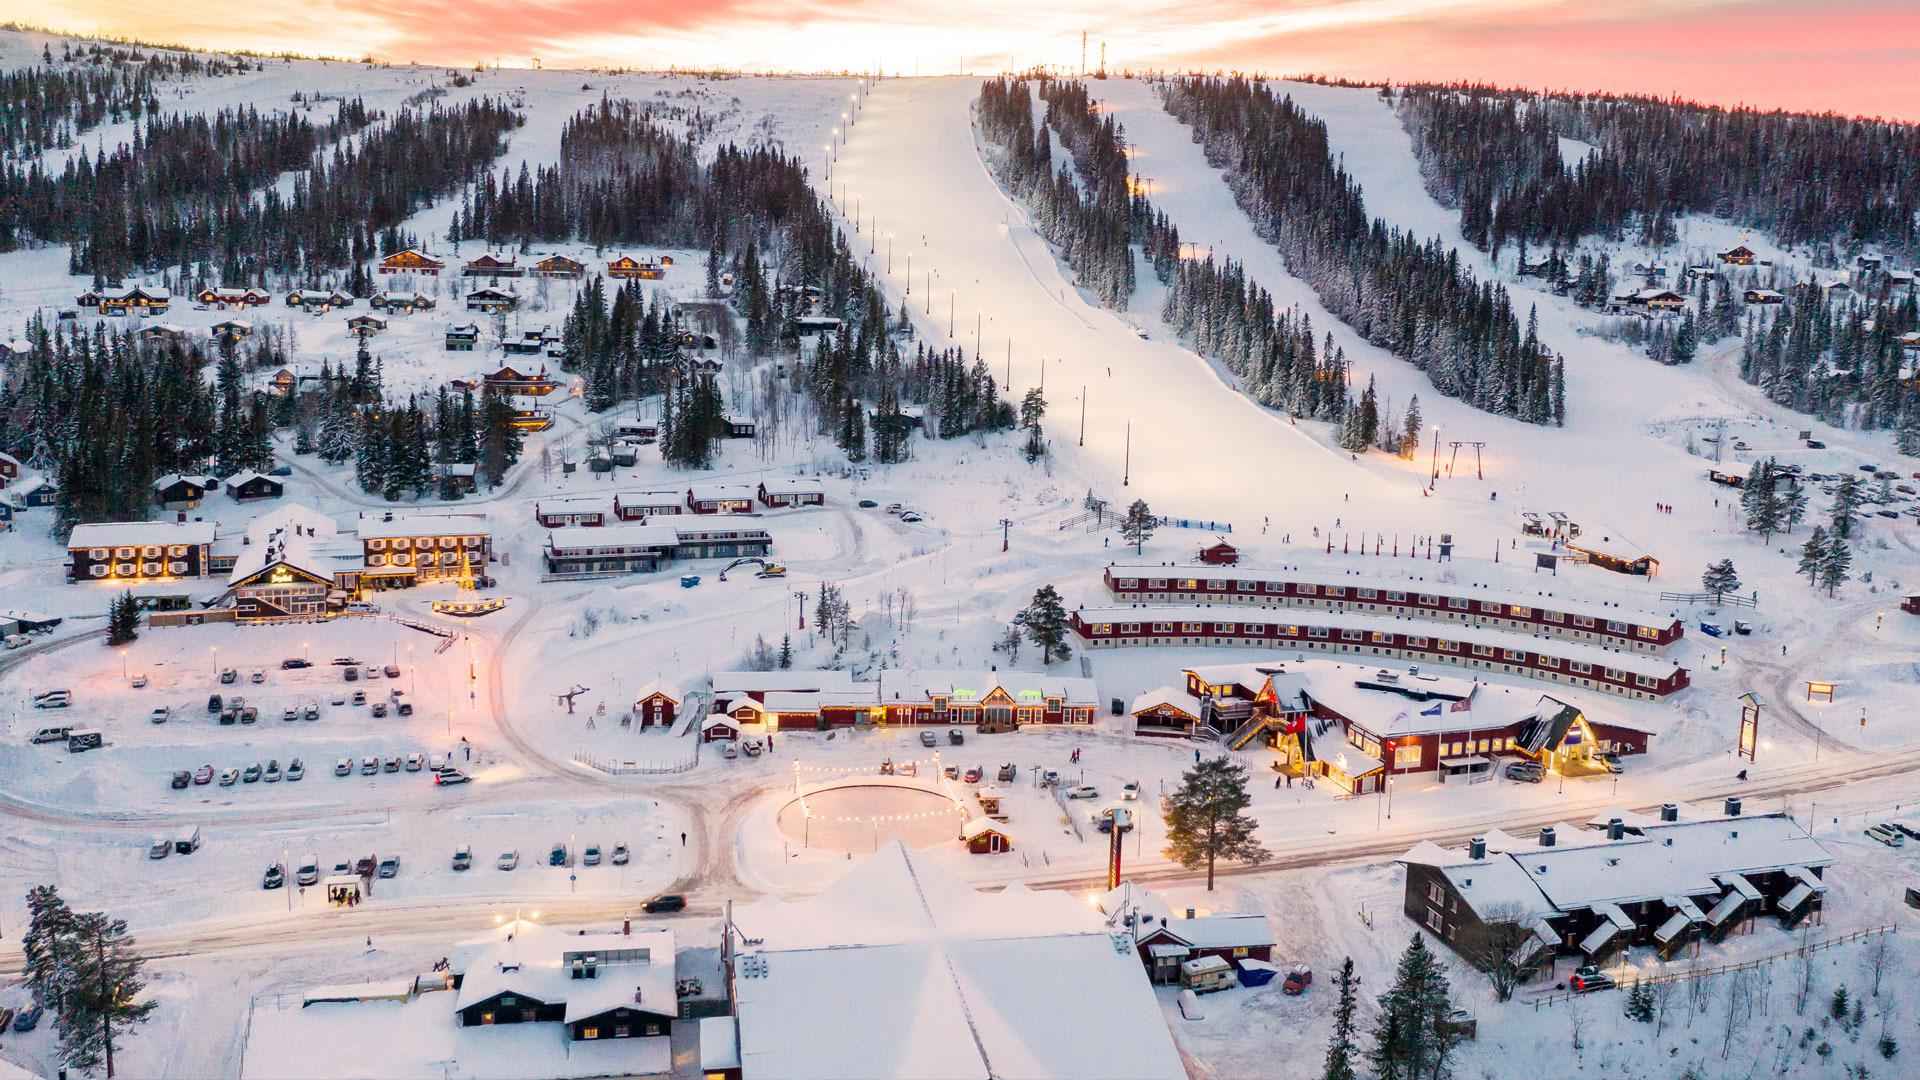 An aerial view of a ski resort during winter.